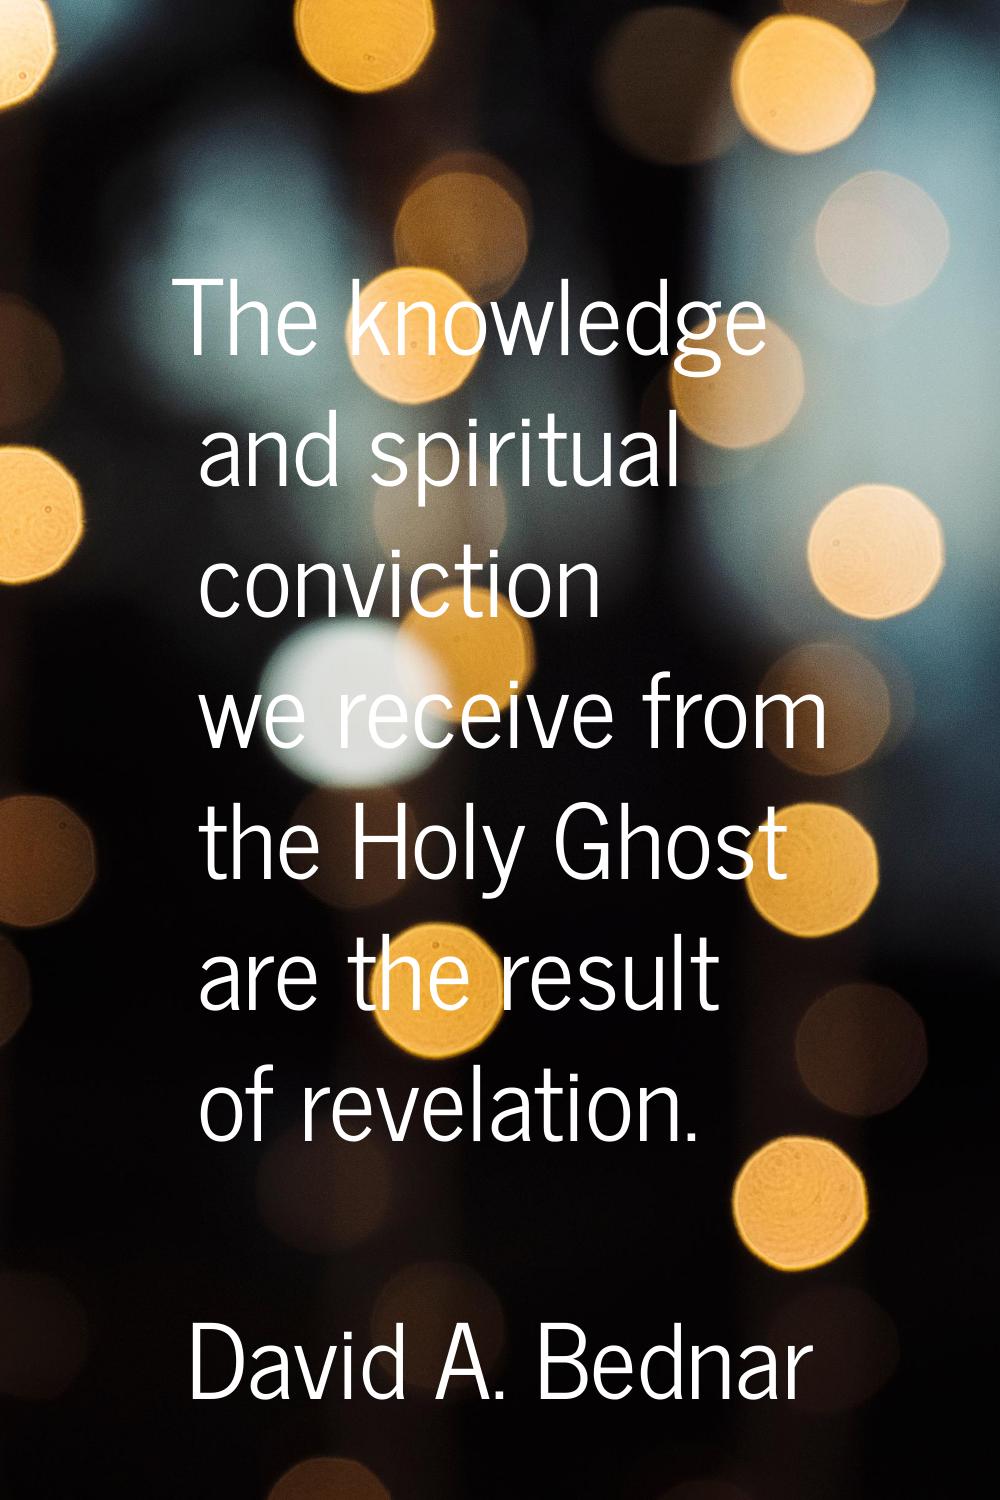 The knowledge and spiritual conviction we receive from the Holy Ghost are the result of revelation.